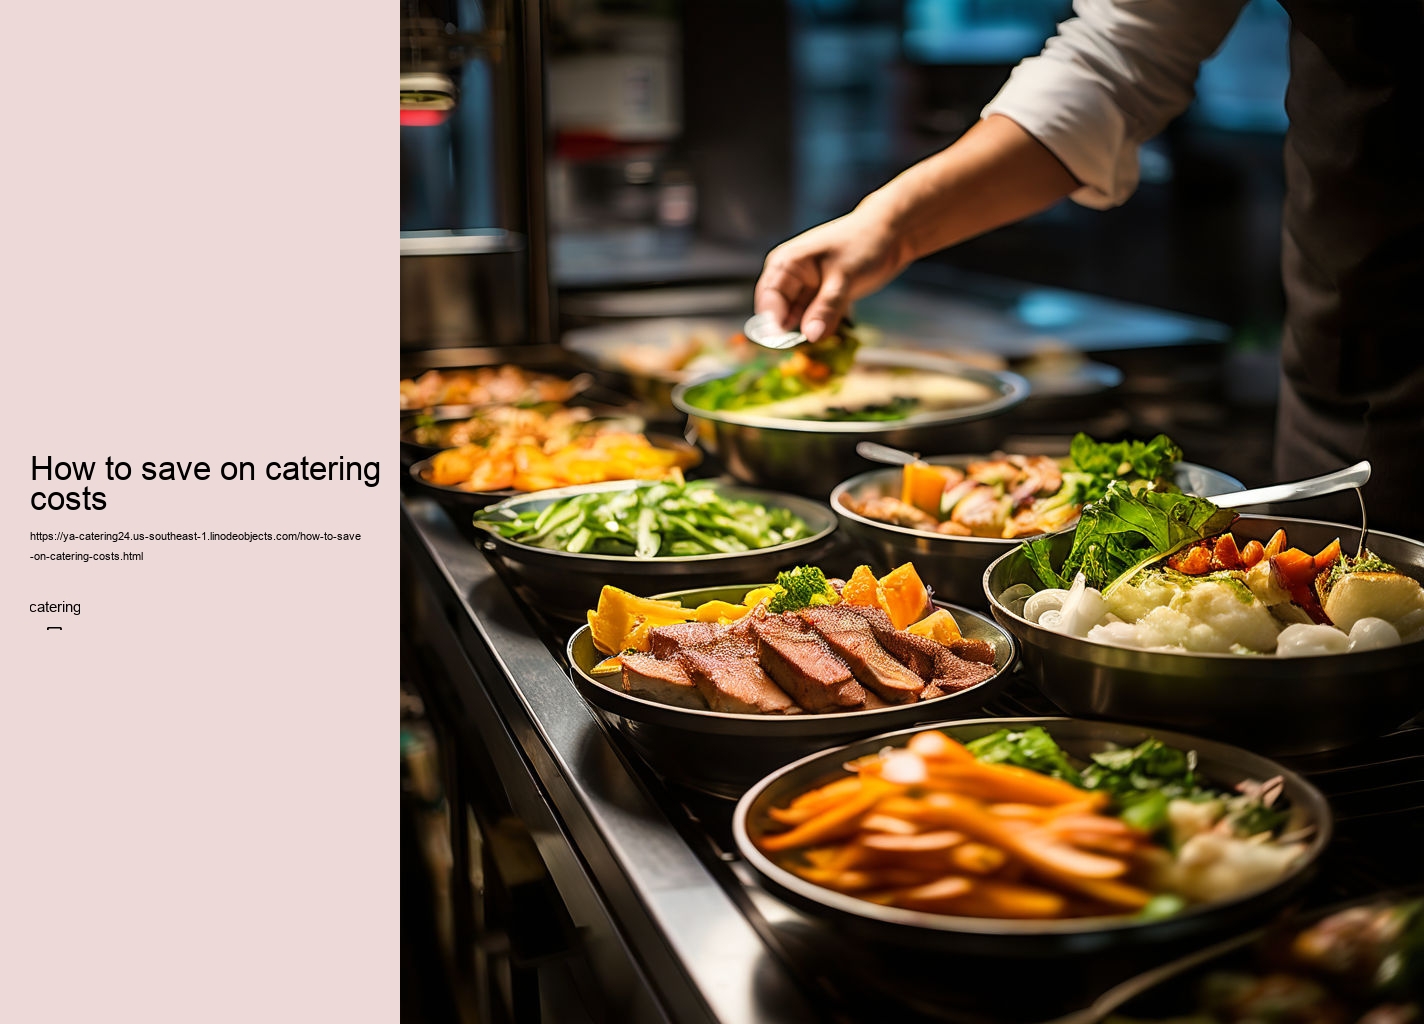 How to save on catering costs